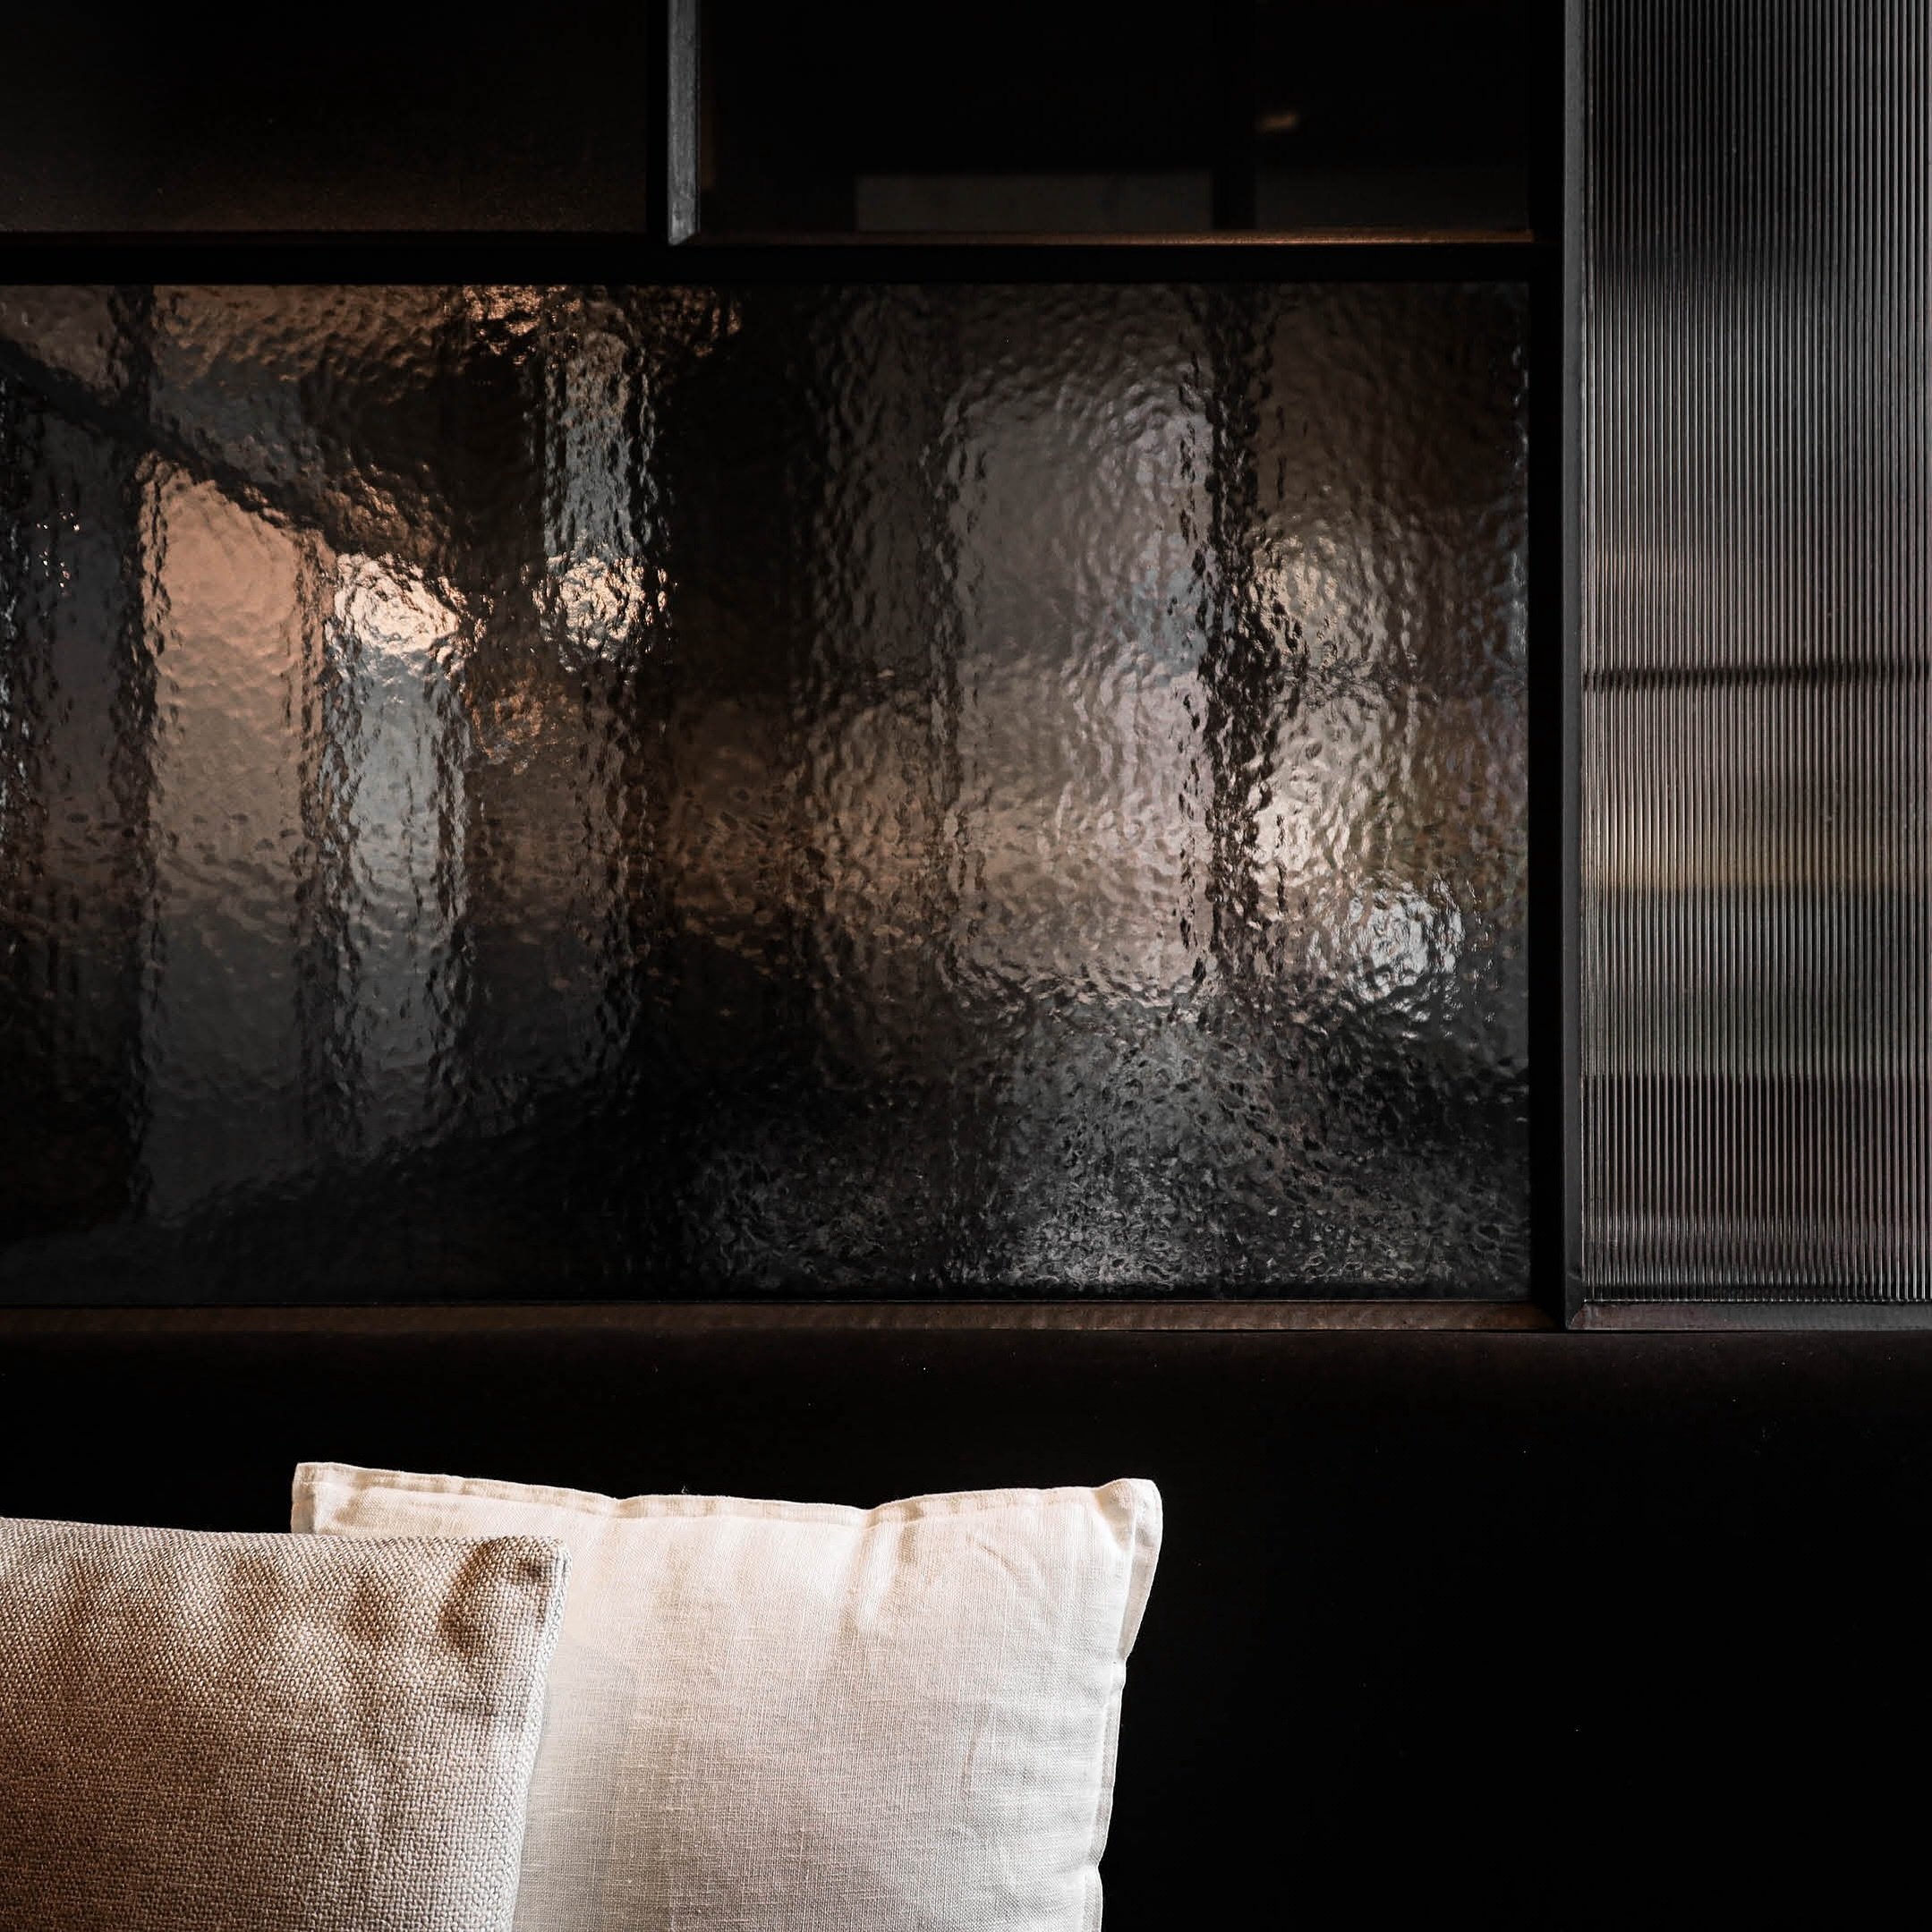 The highly detailed craftsmanship of this steel and glass wall is a reflection of the attention to detail of the food @restaurantchef 

CHEFW | horeca - interieur

#interiordesign #interieurdesign #steelframe #steelandglass #restaurant #interiorstyli